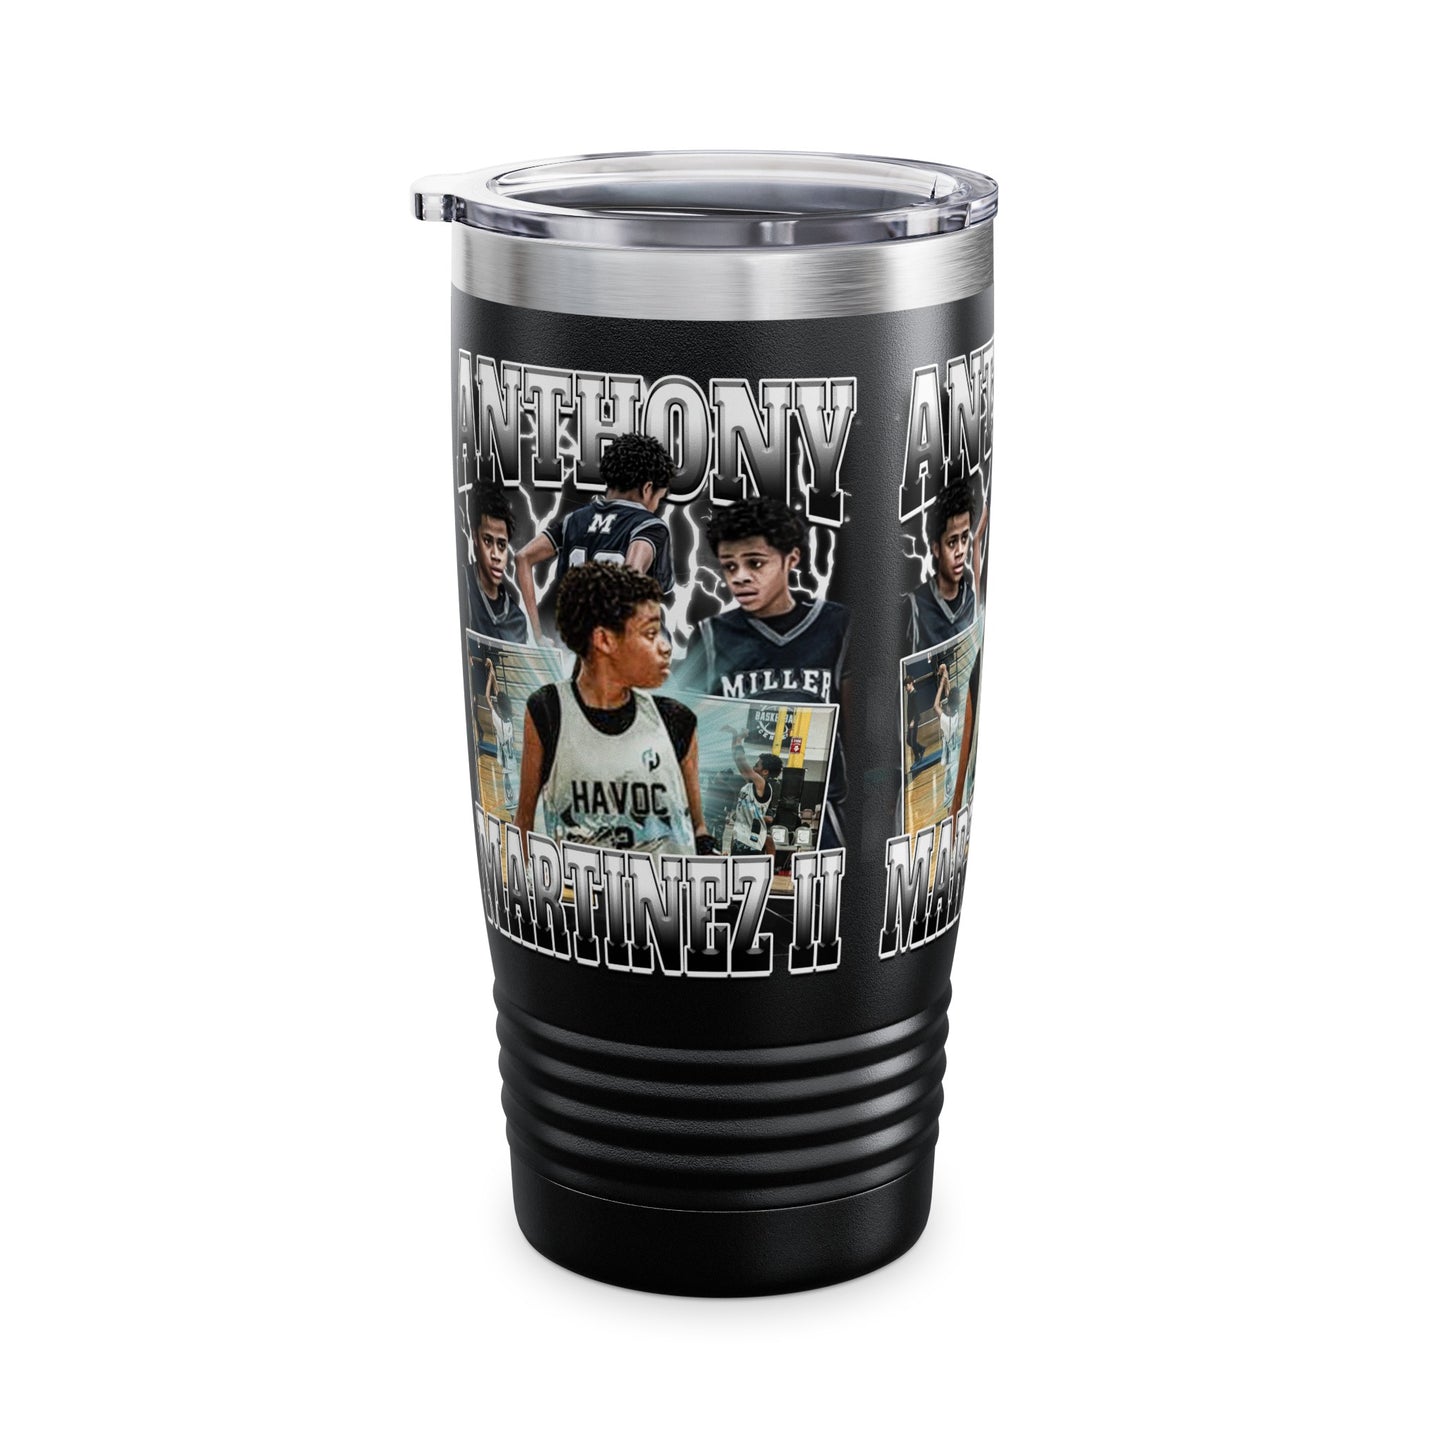 Anthony Martinez ll Stainless Steal Tumbler